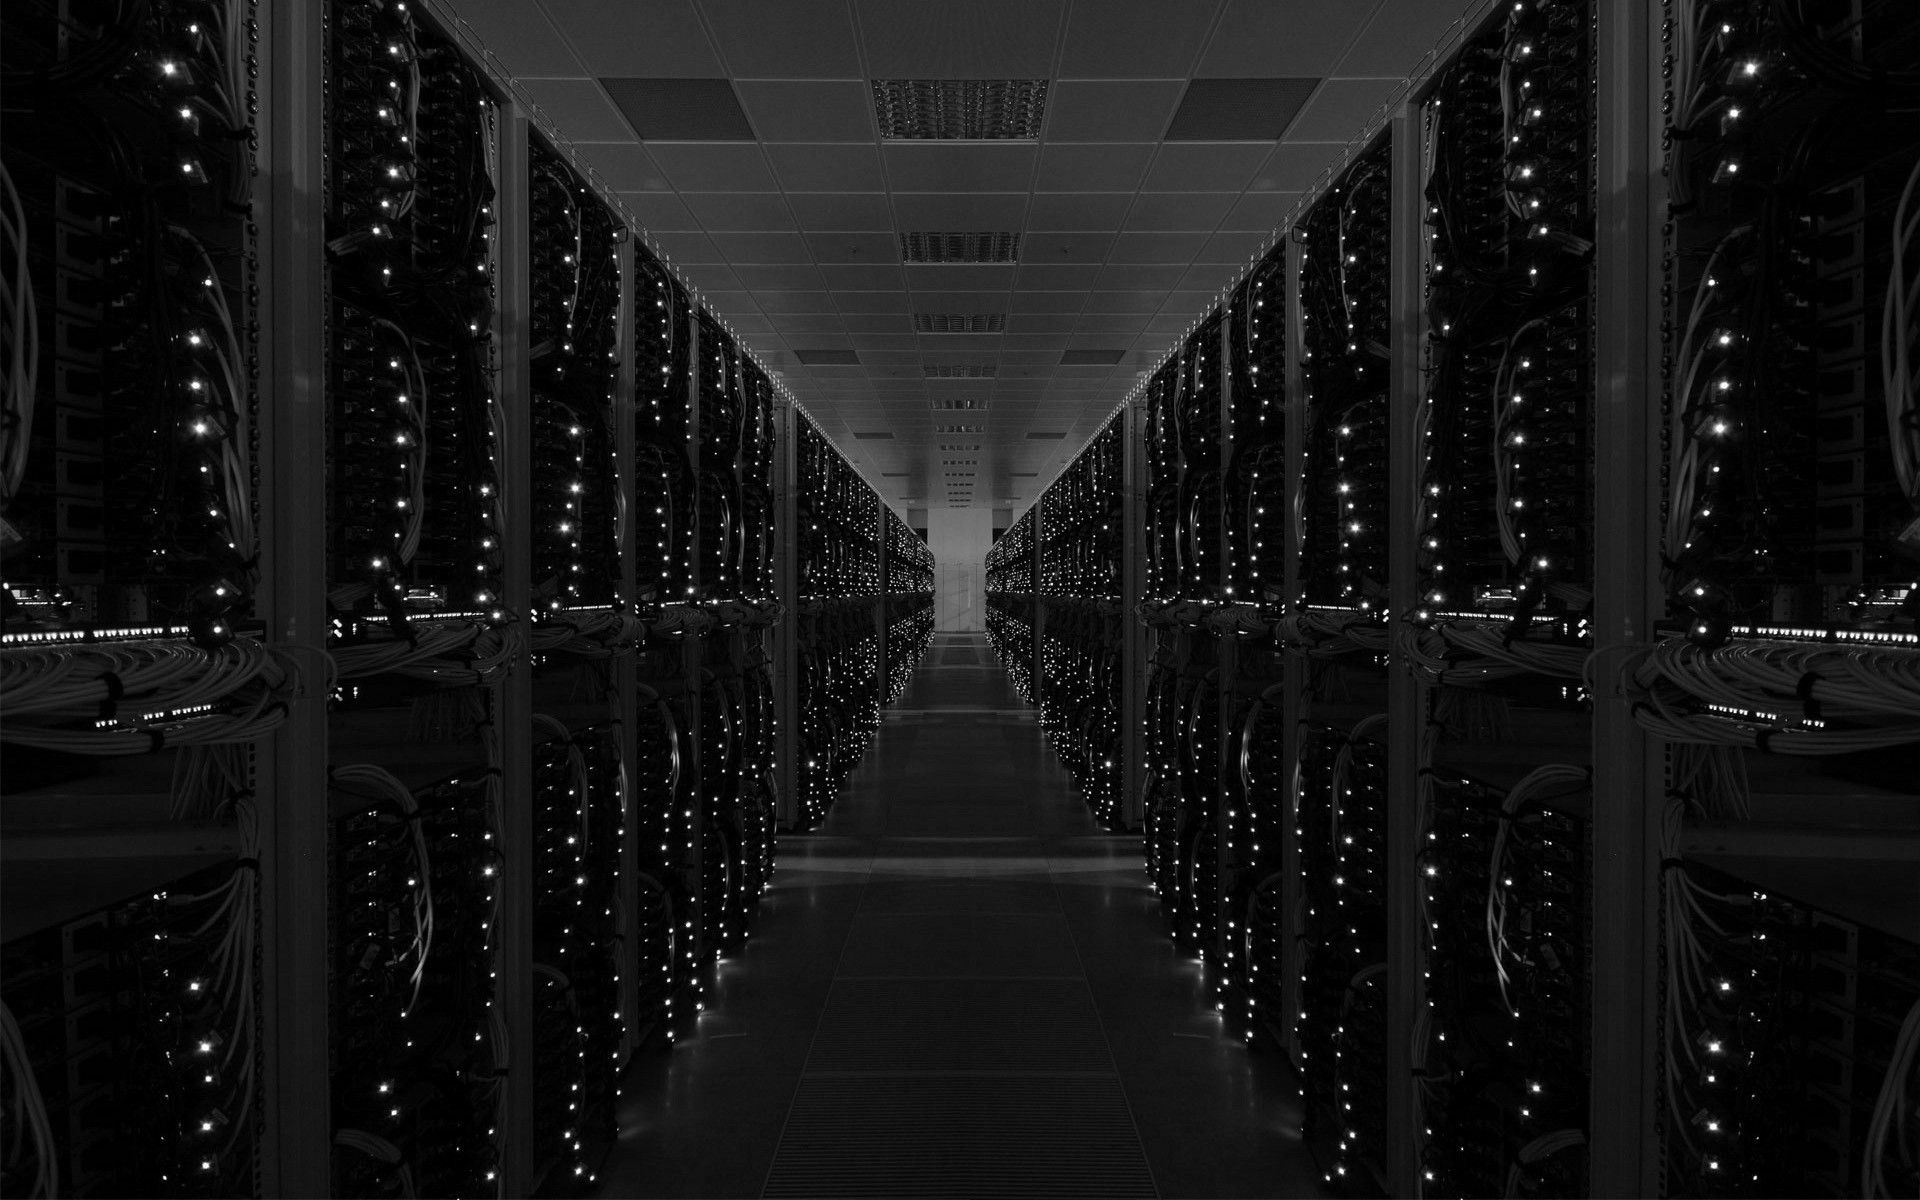 Wallpaper, night, architecture, reflection, symmetry, atmosphere, metropolis, server, midnight, structure, data center, light, line, darkness, 1920x1200 px, black and white, monochrome photography 1920x1200